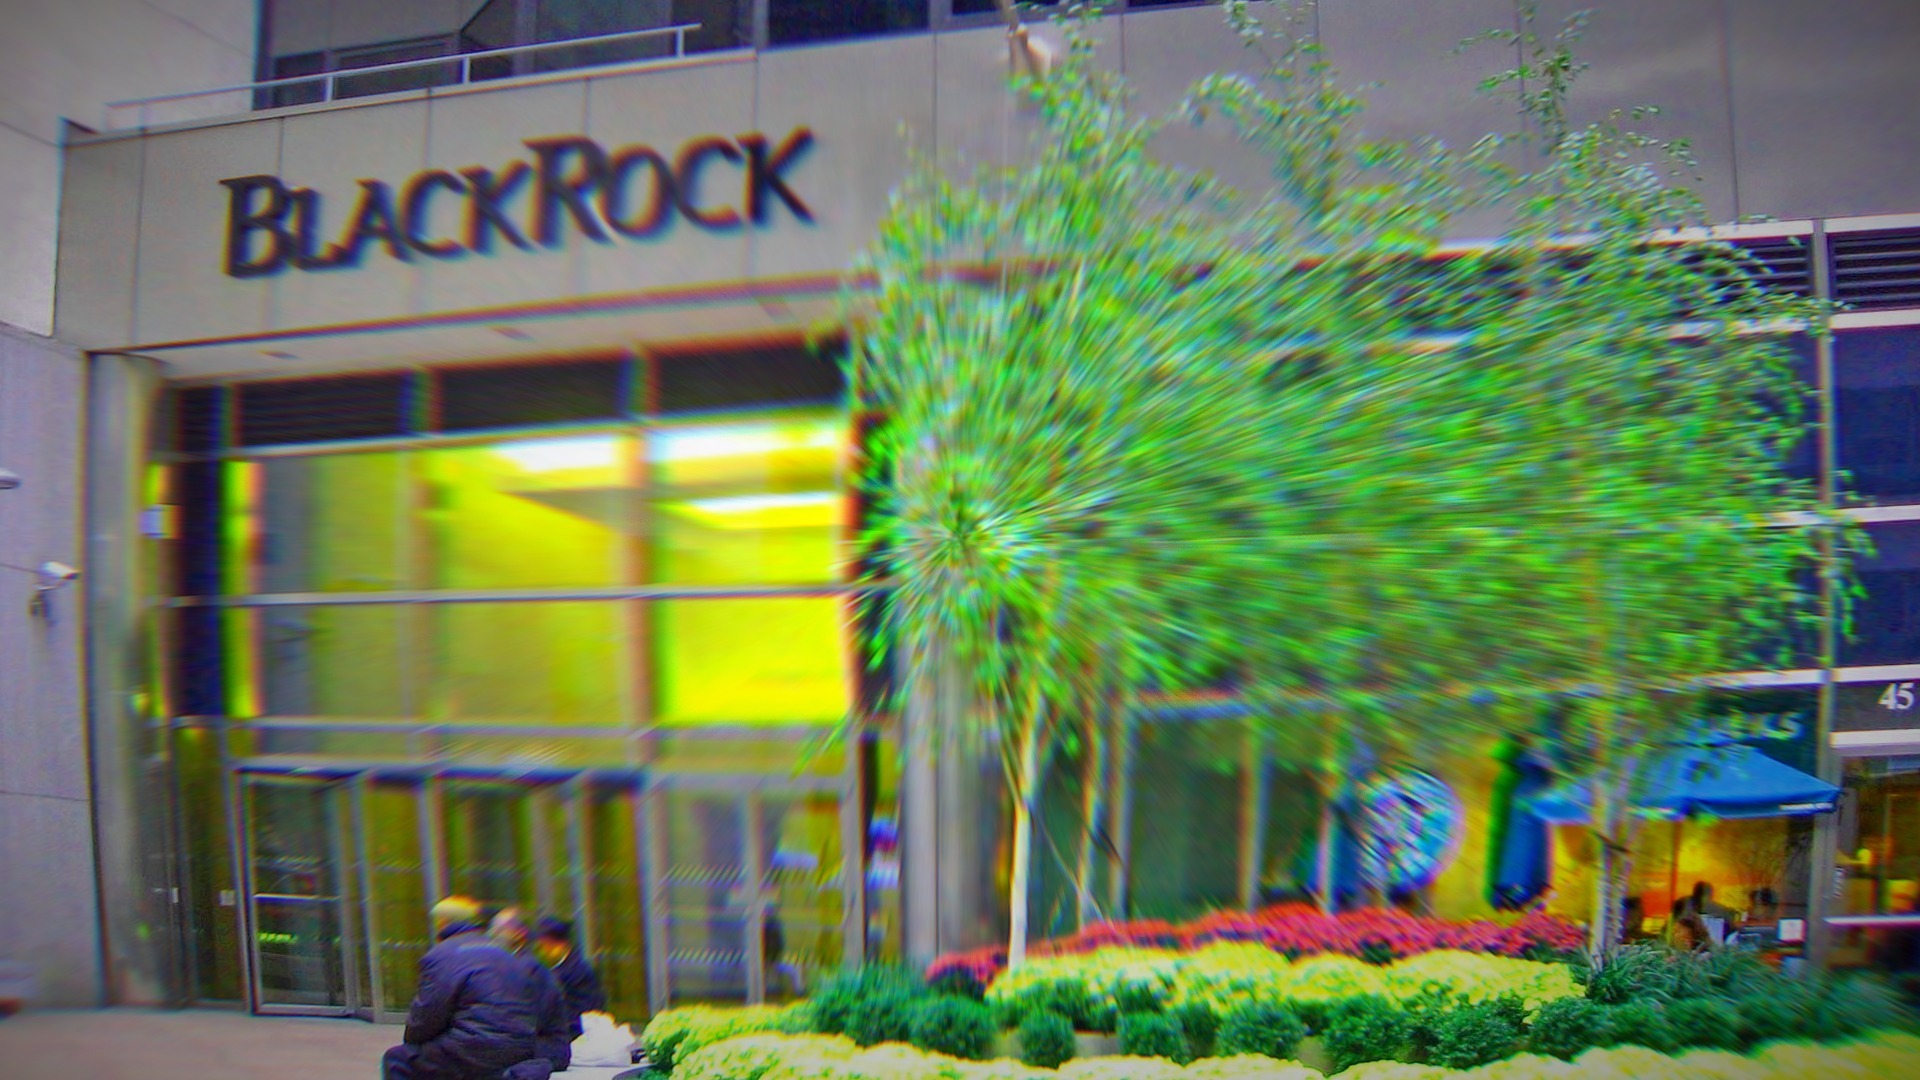 BlackRock is one of the big-name providers offering a spot bitcoin ETF. (Jim Henderson, modified by CoinDesk)